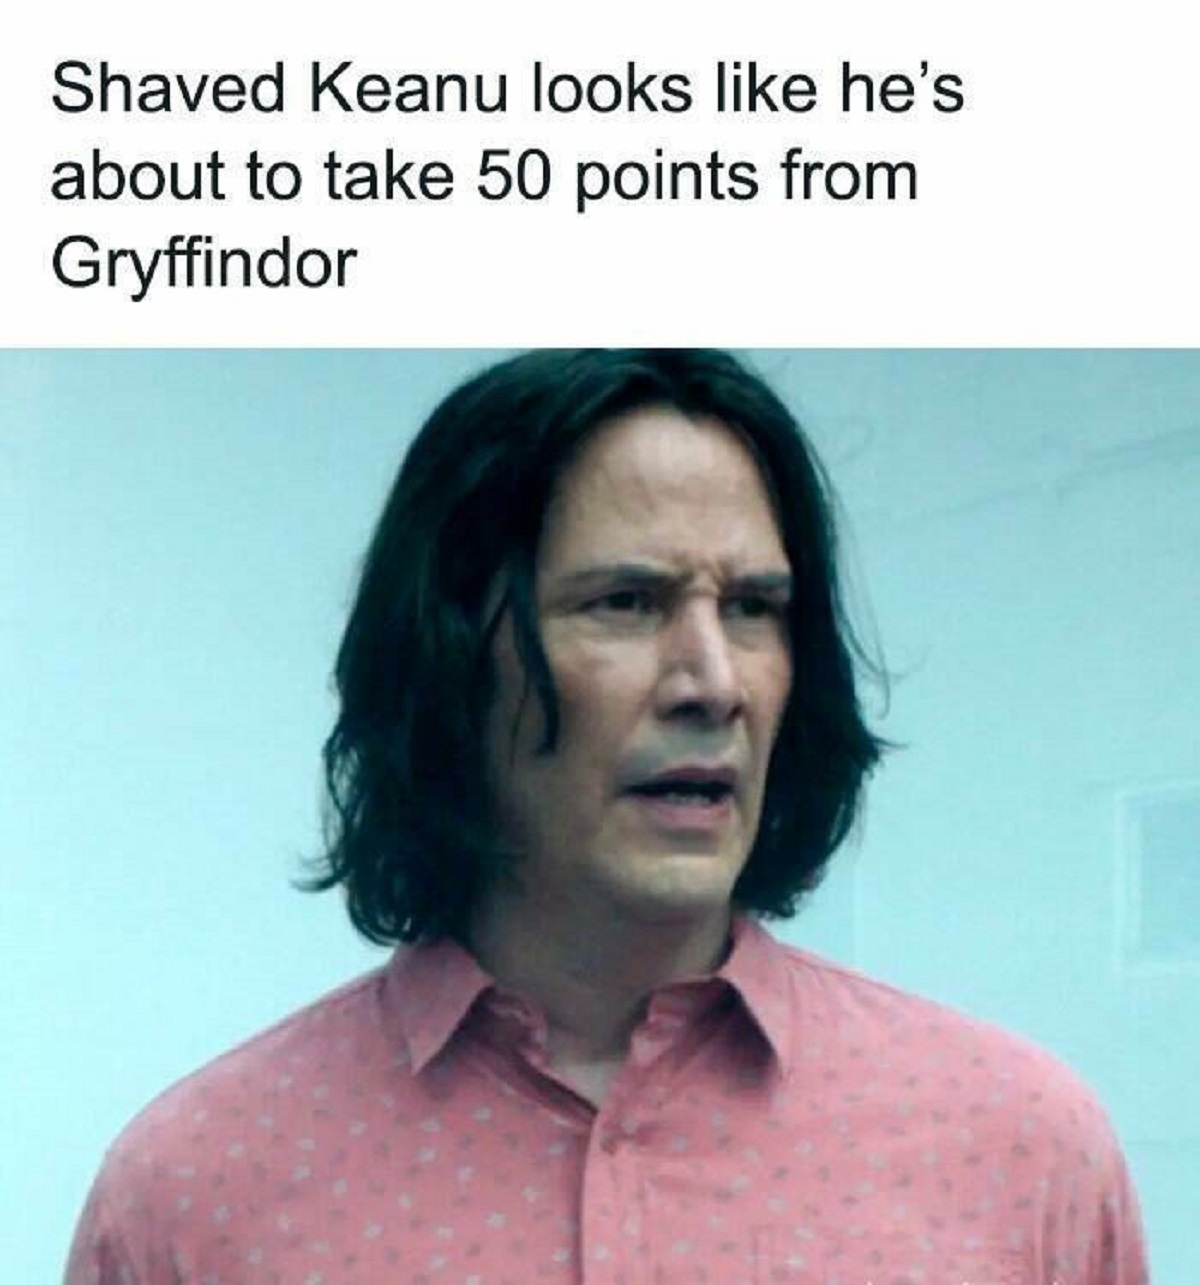 keanu reeves bill & ted face the music - Shaved Keanu looks he's about to take 50 points from Gryffindor